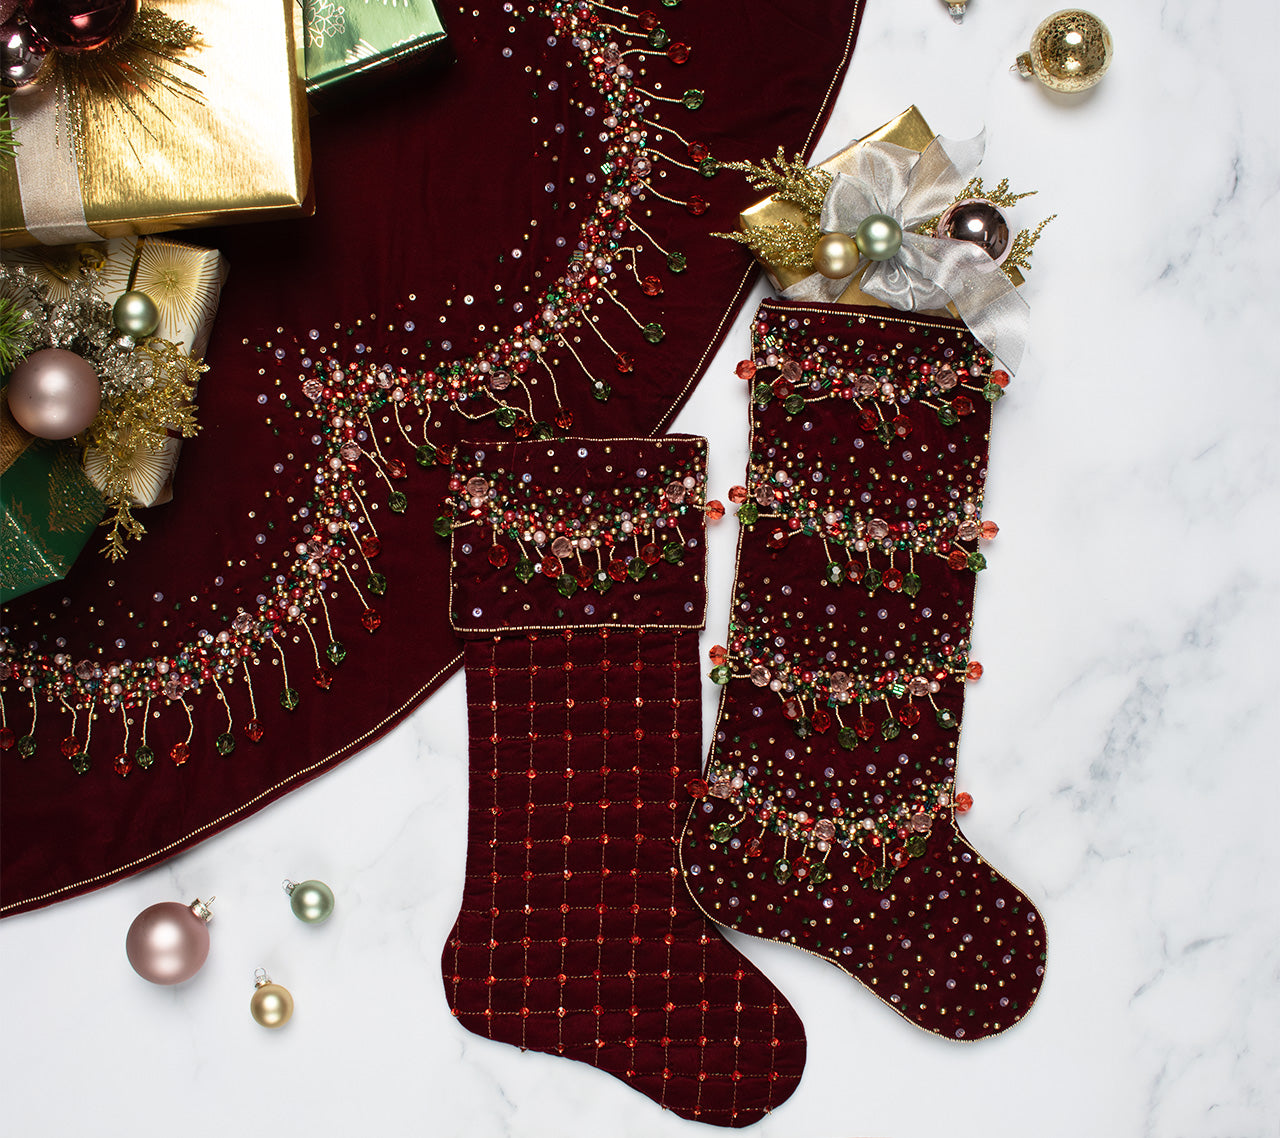 The Best Christmas Tree Skirts To Beautifully Jazz Up Your Holiday Decor